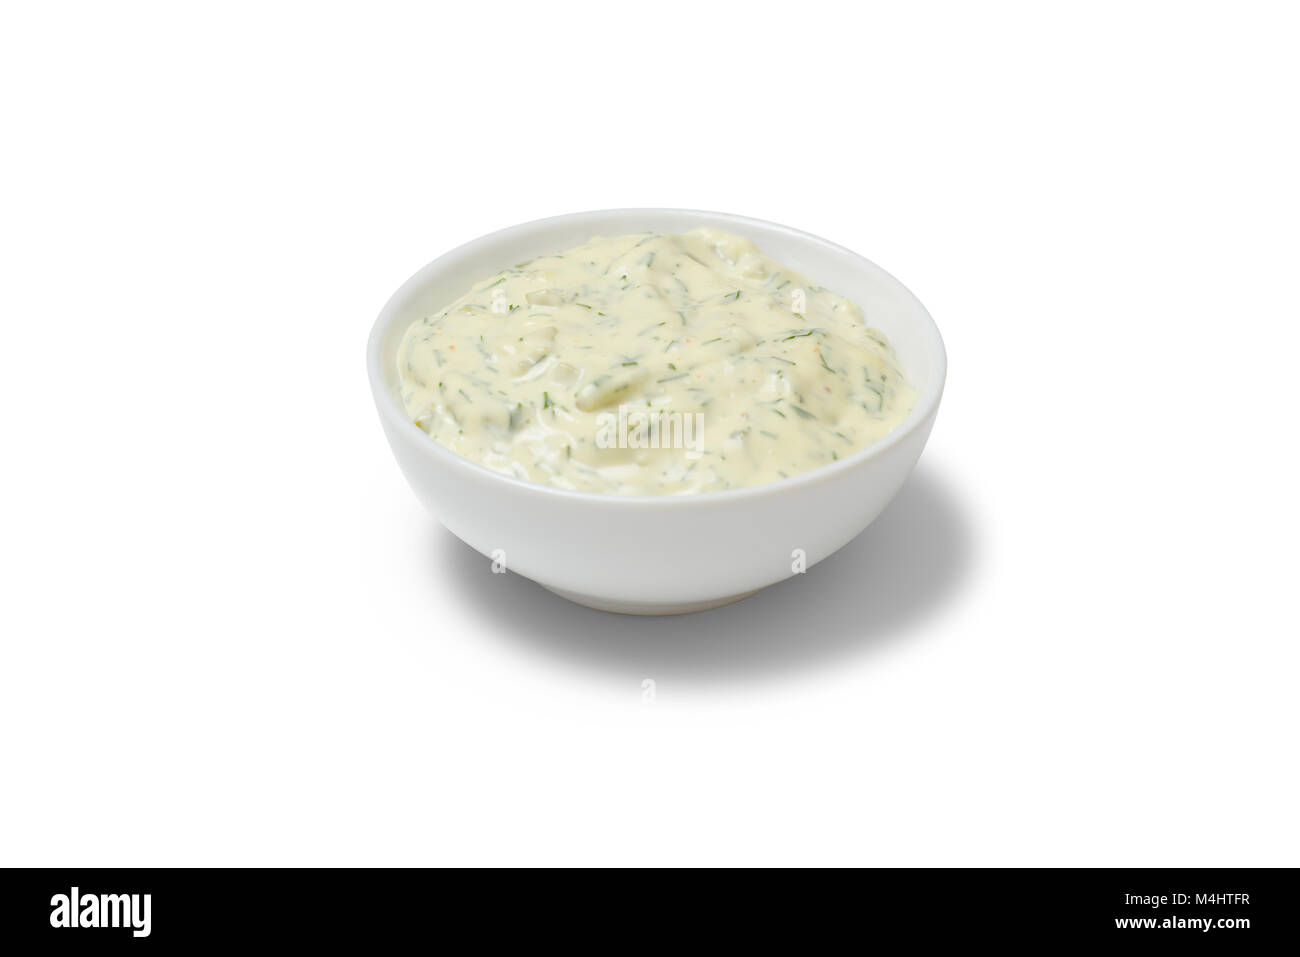 Garlic sauce in a gravy boat on white background Stock Photo